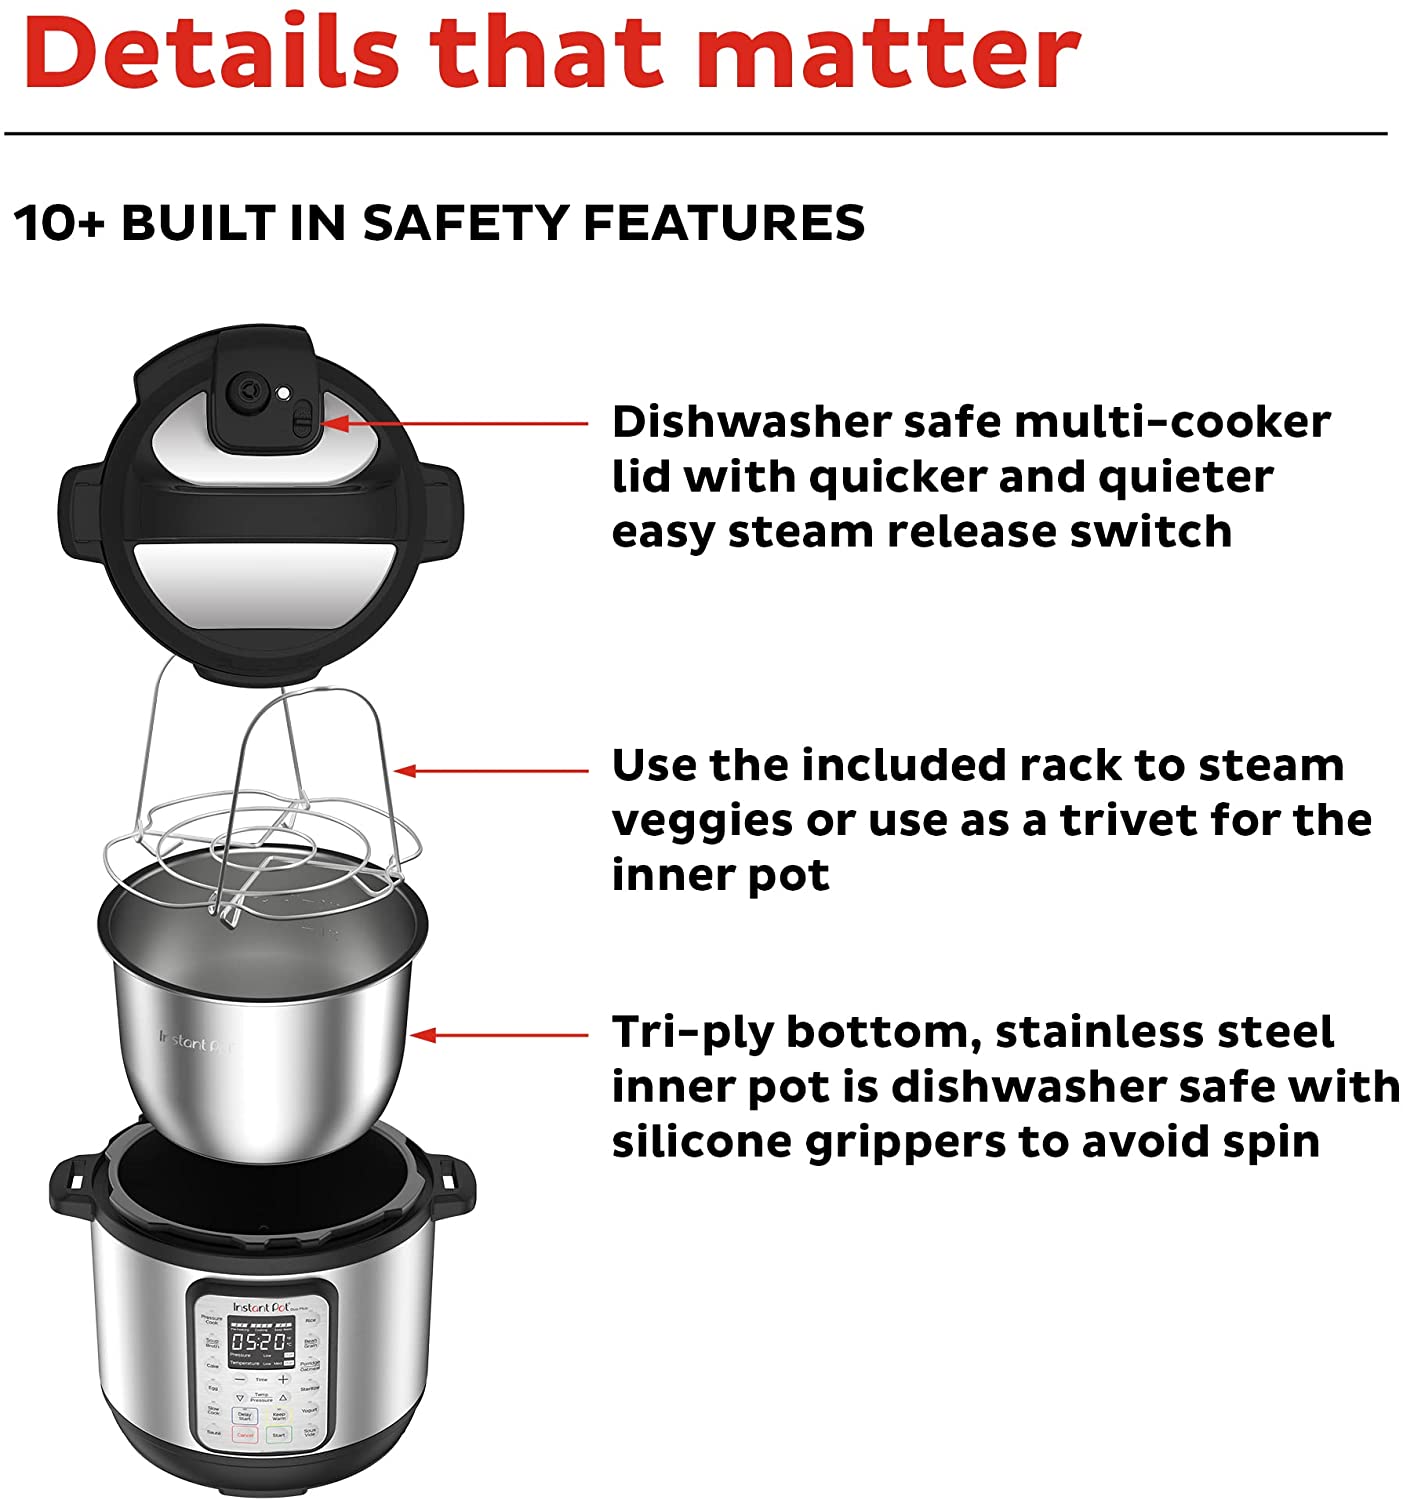 Slow Cooker, 10 in 1 Programmable Cooker, 6Qt Stainless Steel, Rice Cooker,  Yogurt Maker, Delay Start, Steaming Rack and Glass Lid, Adjustable